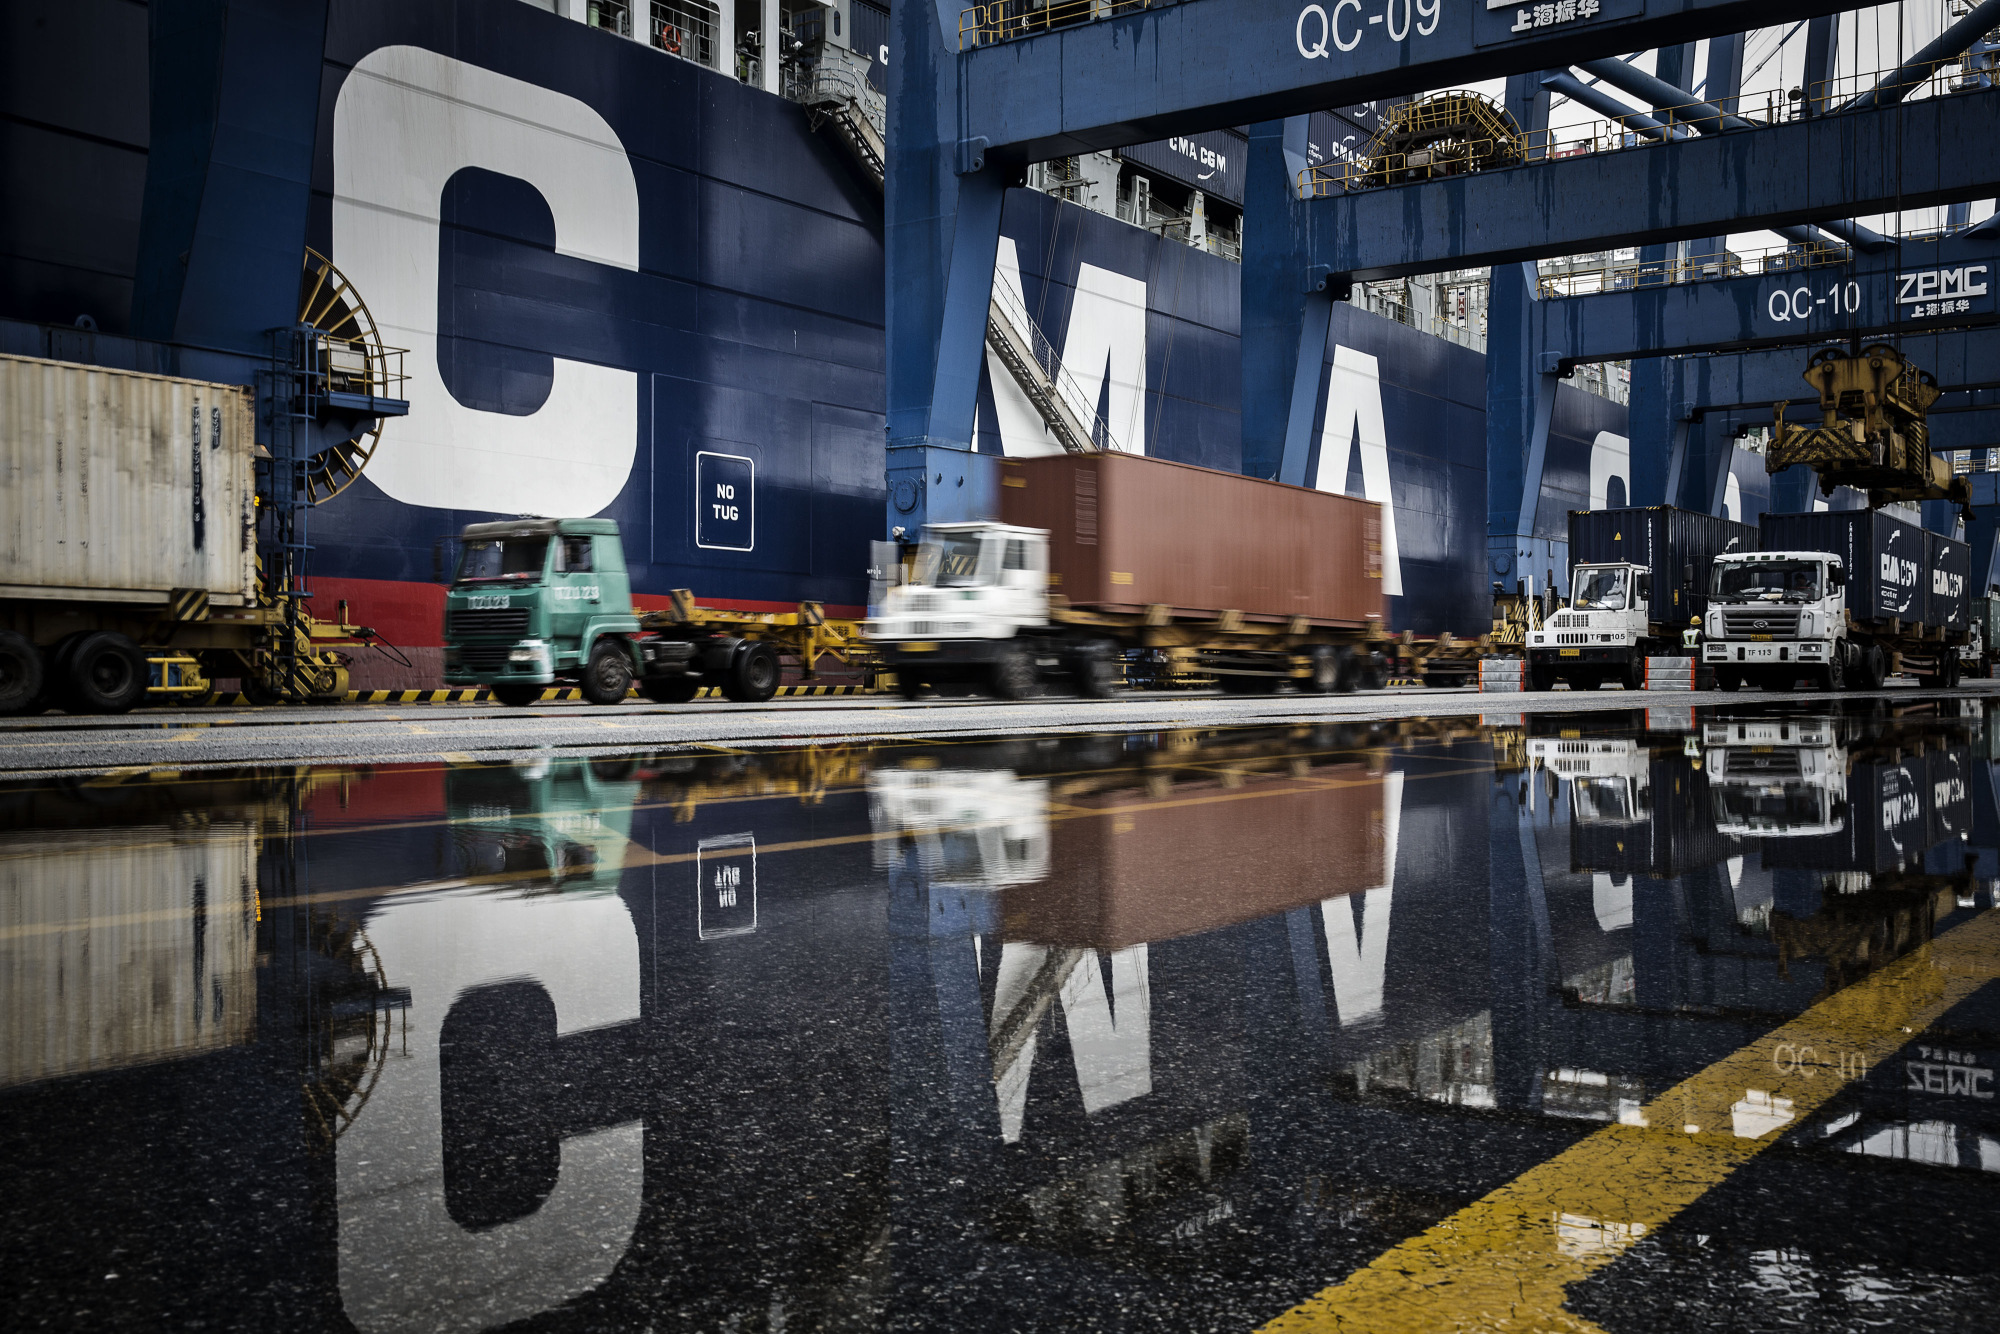 Trucks are reflected in a puddle as they wait in line to unload their containers onto a container ship docked at the Guangzhou Nansha Container Port in Guangzhou, China.